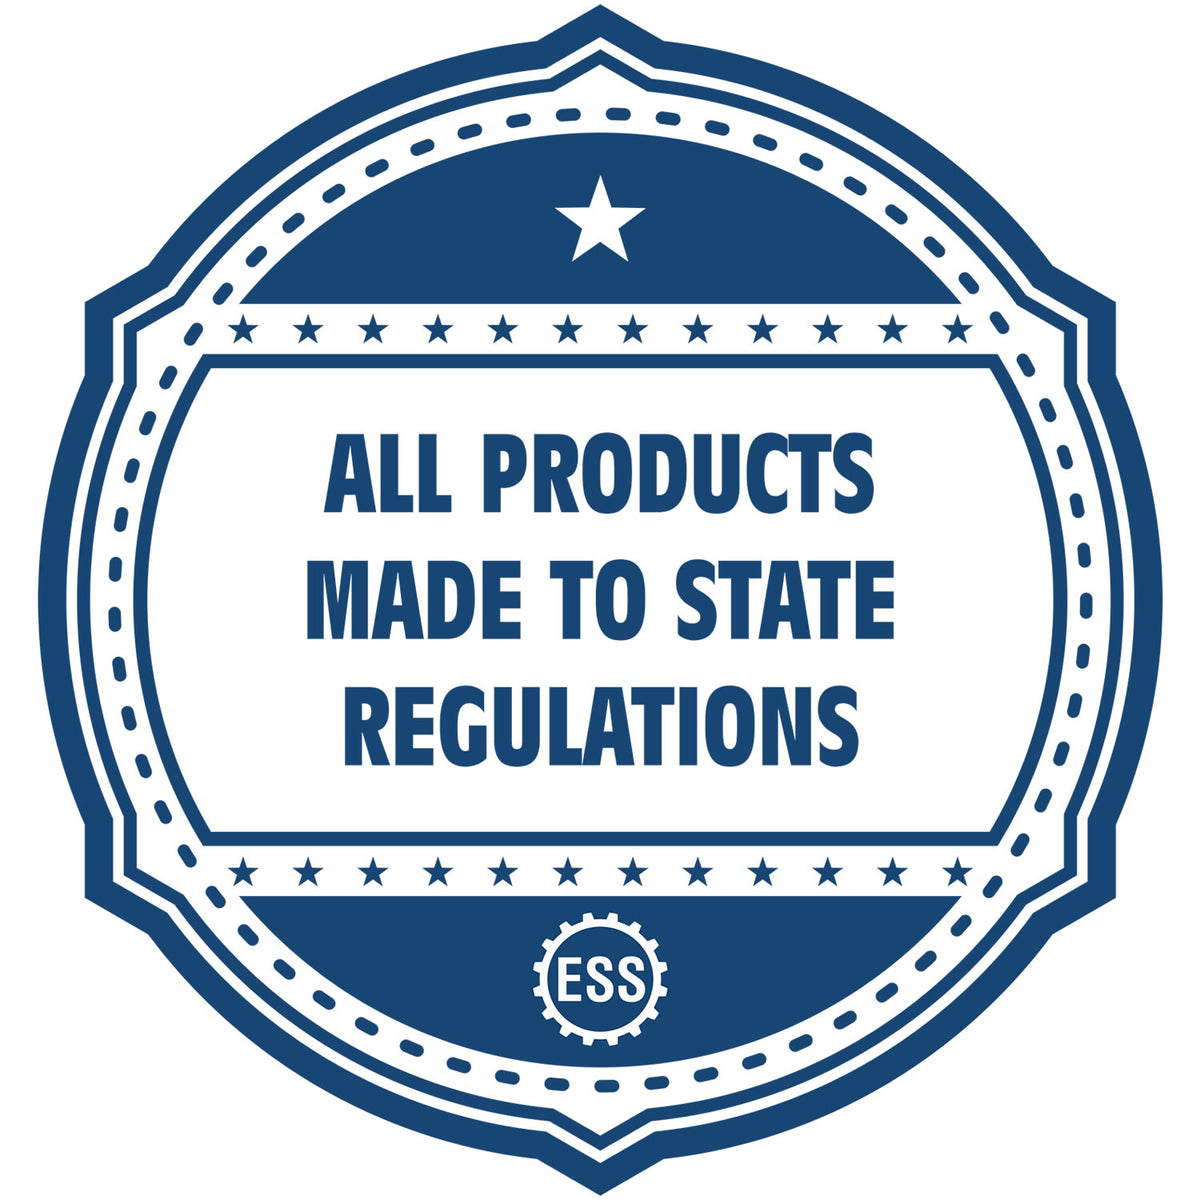 An icon or badge element for the Self-Inking Rectangular Georgia Notary Stamp showing that this product is made in compliance with state regulations.